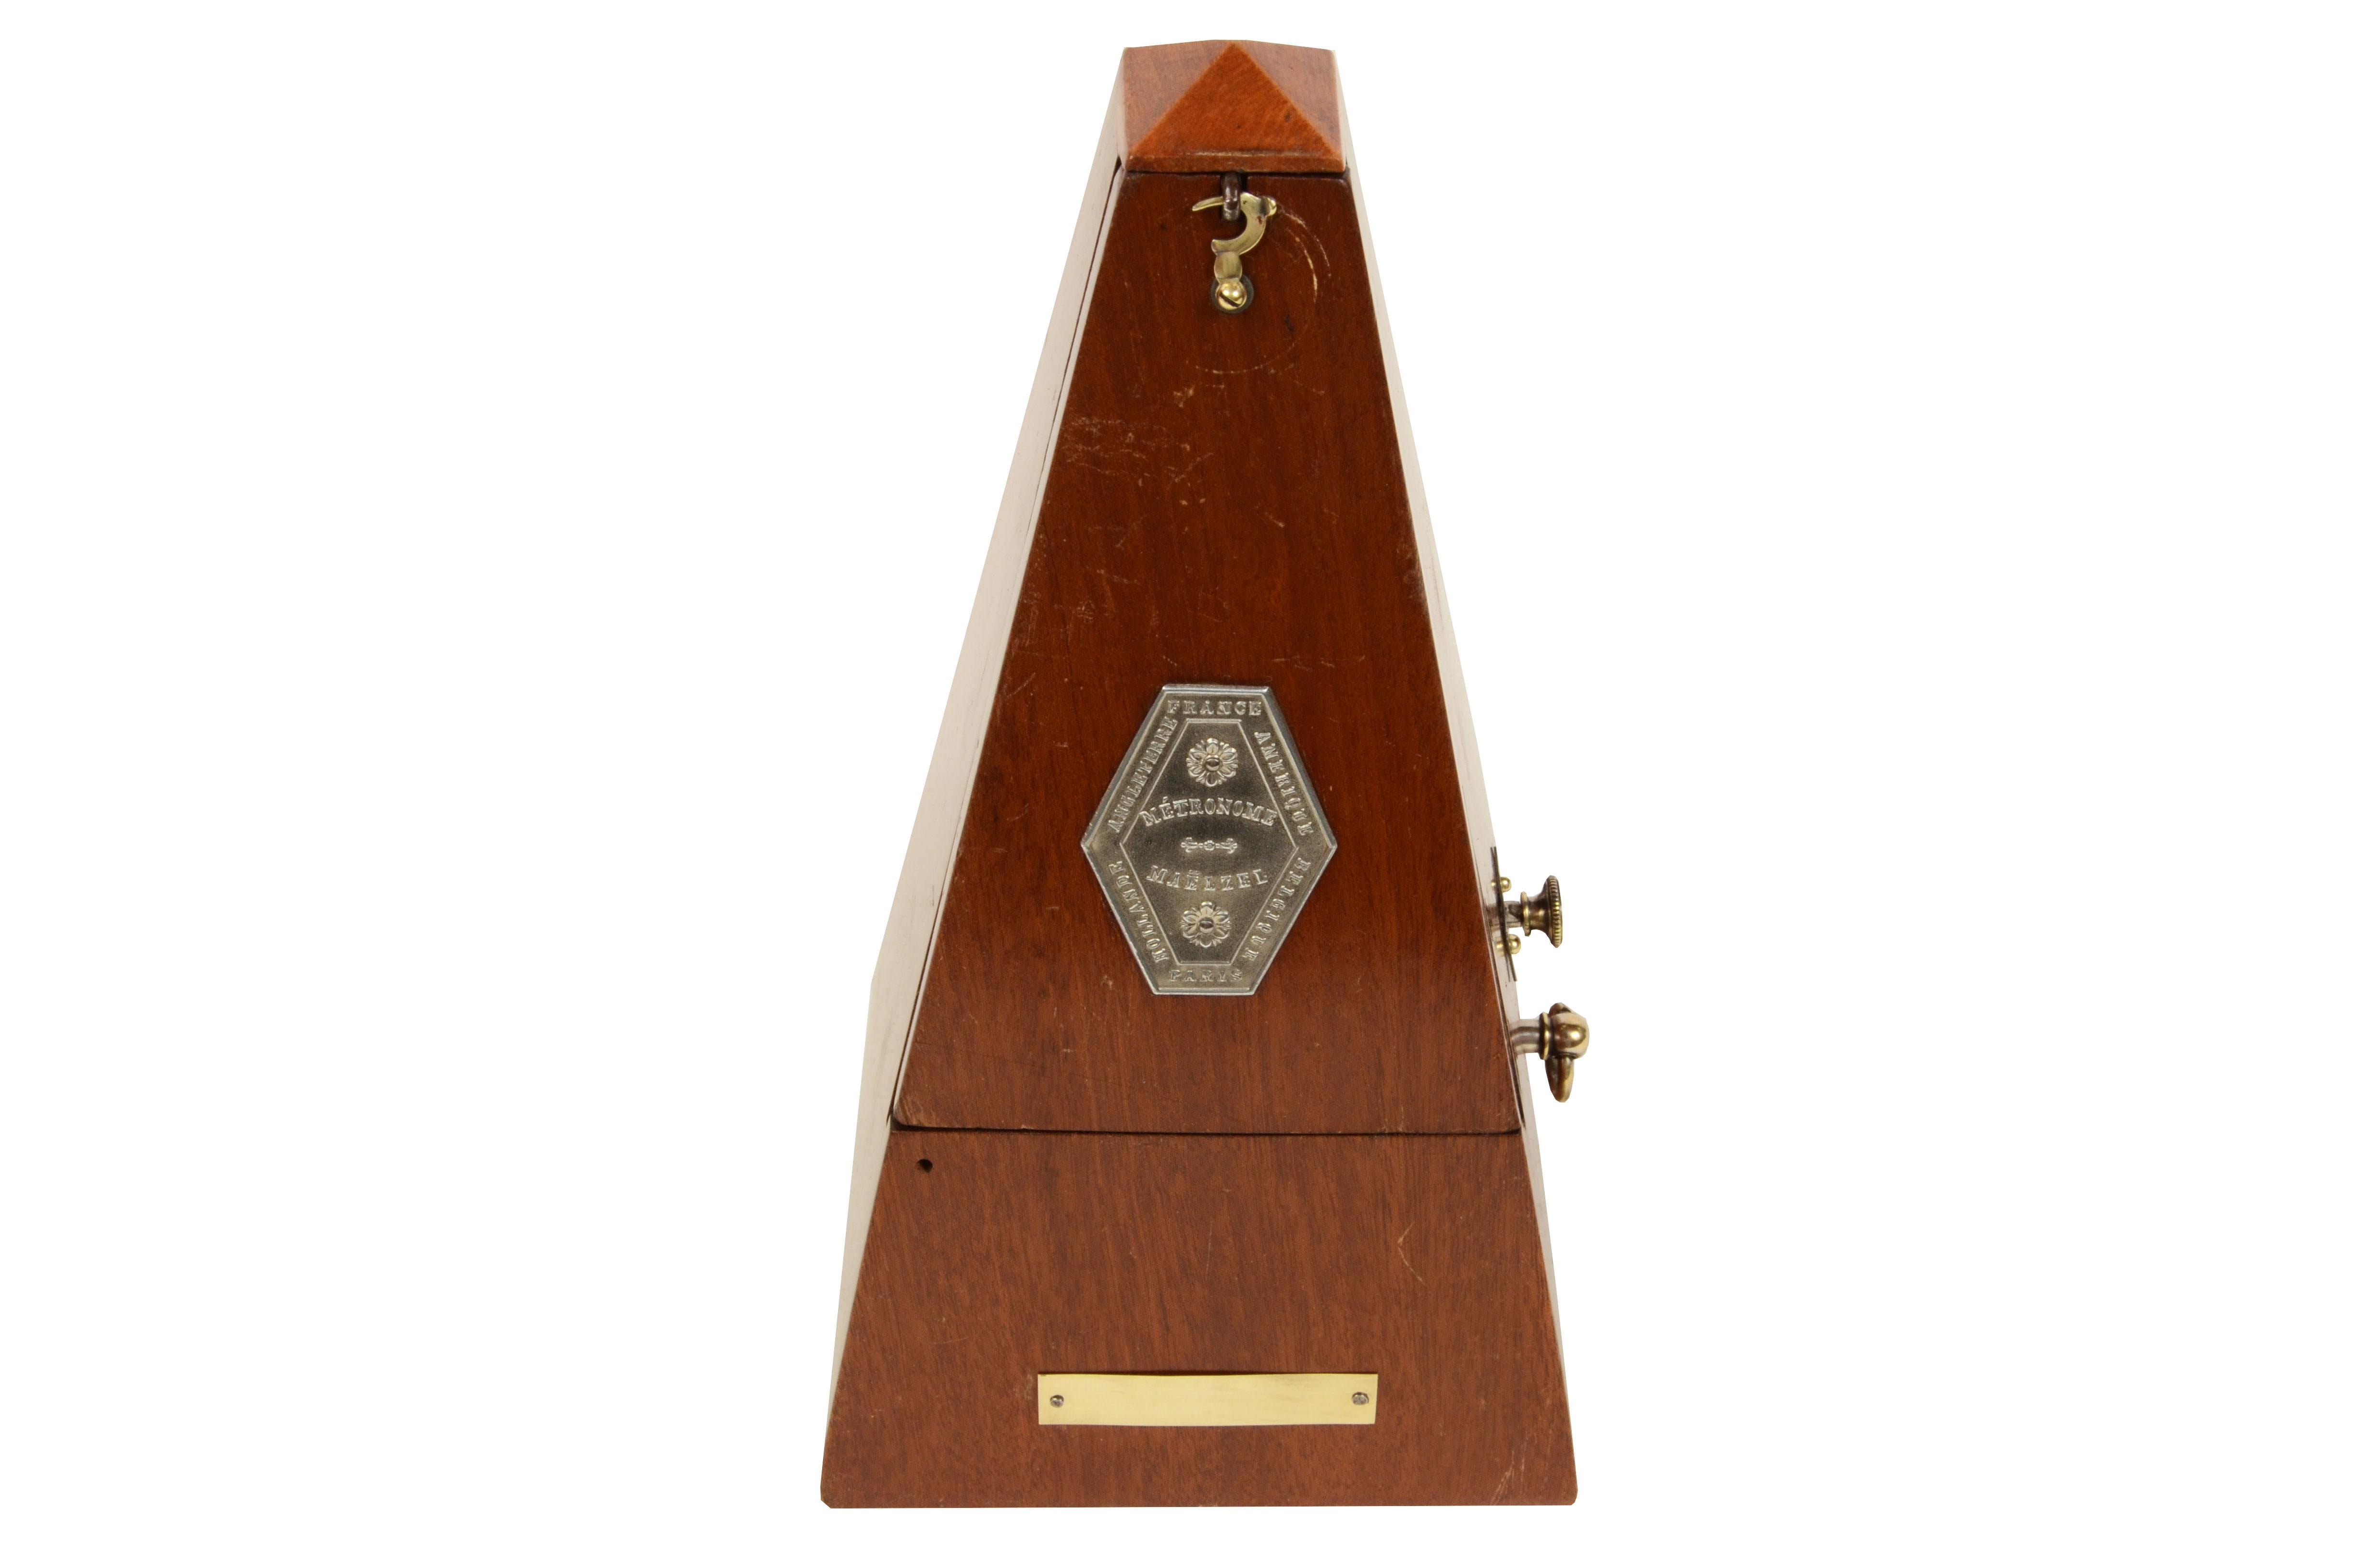 Late 19th Century Metronome Antique Instrument to Measure the Tempo of Music 7